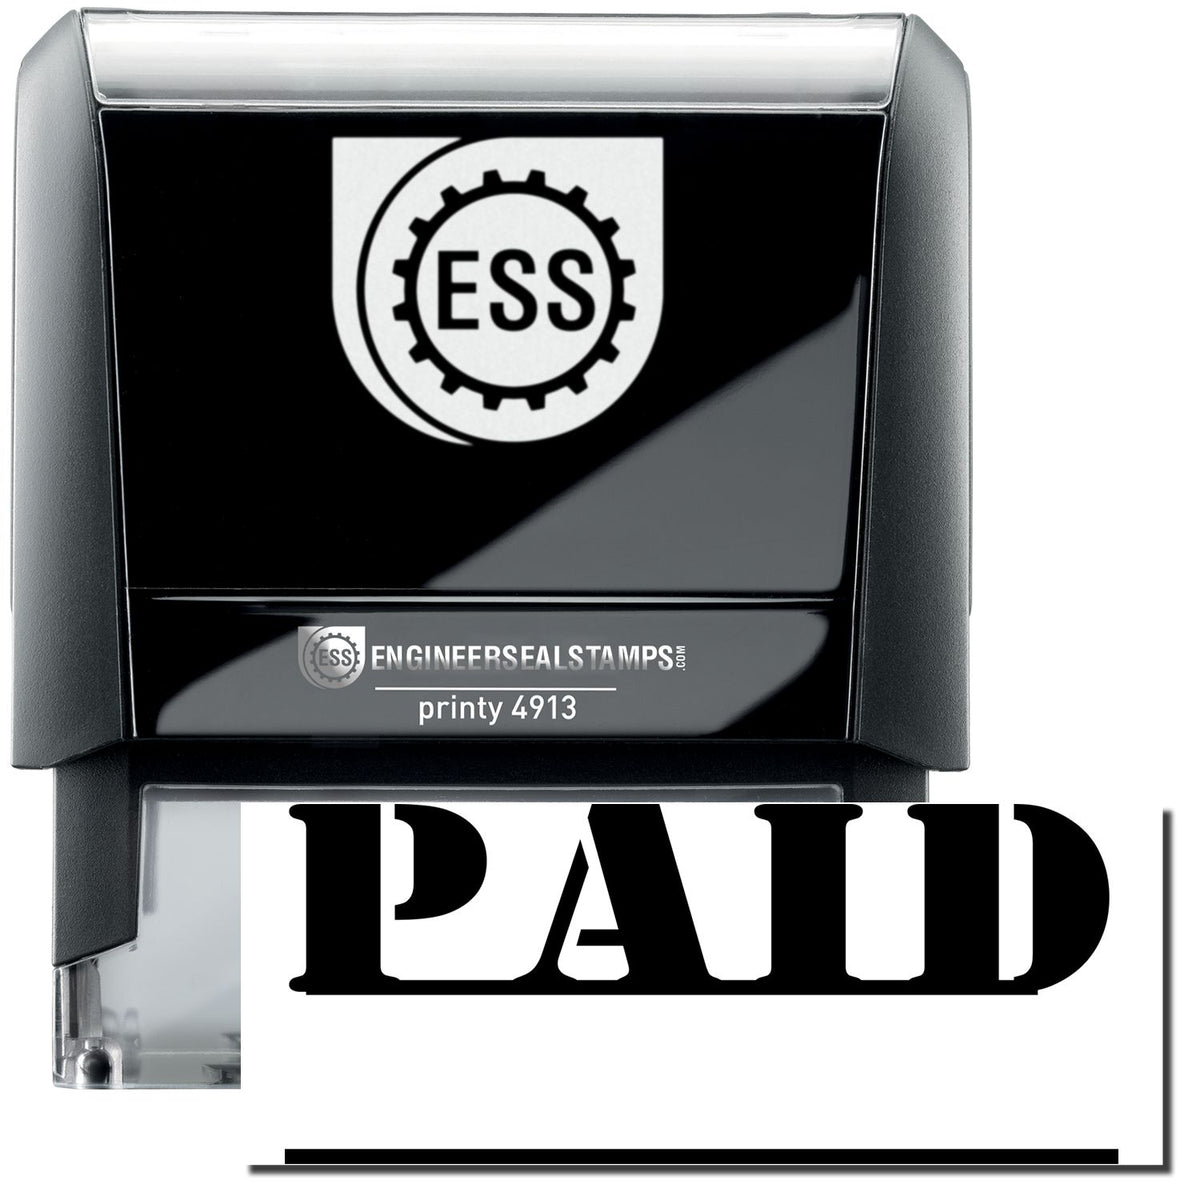 A self-inking stamp with a stamped image showing how the text &quot;PAID&quot; in a large bold font with a Date Line under it is displayed after stamping.